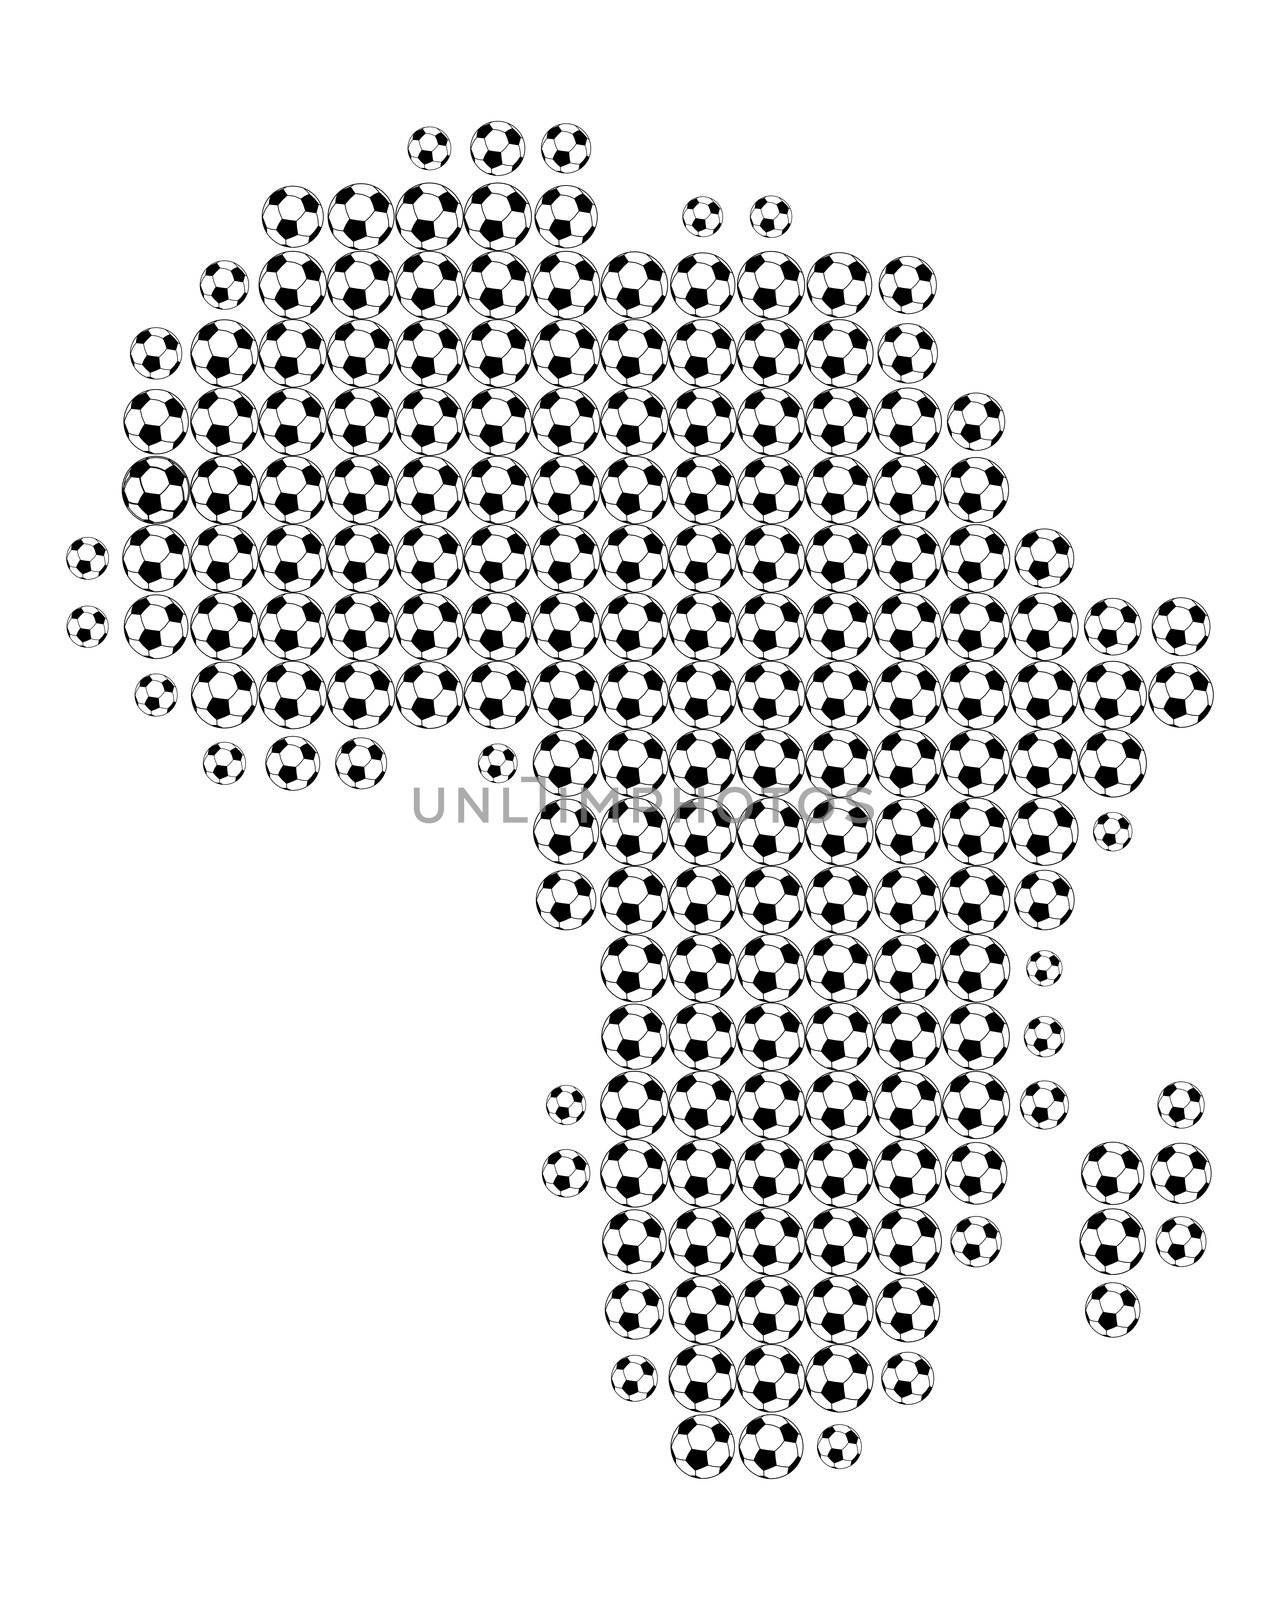 Map of Africa in soccer balls by rbiedermann